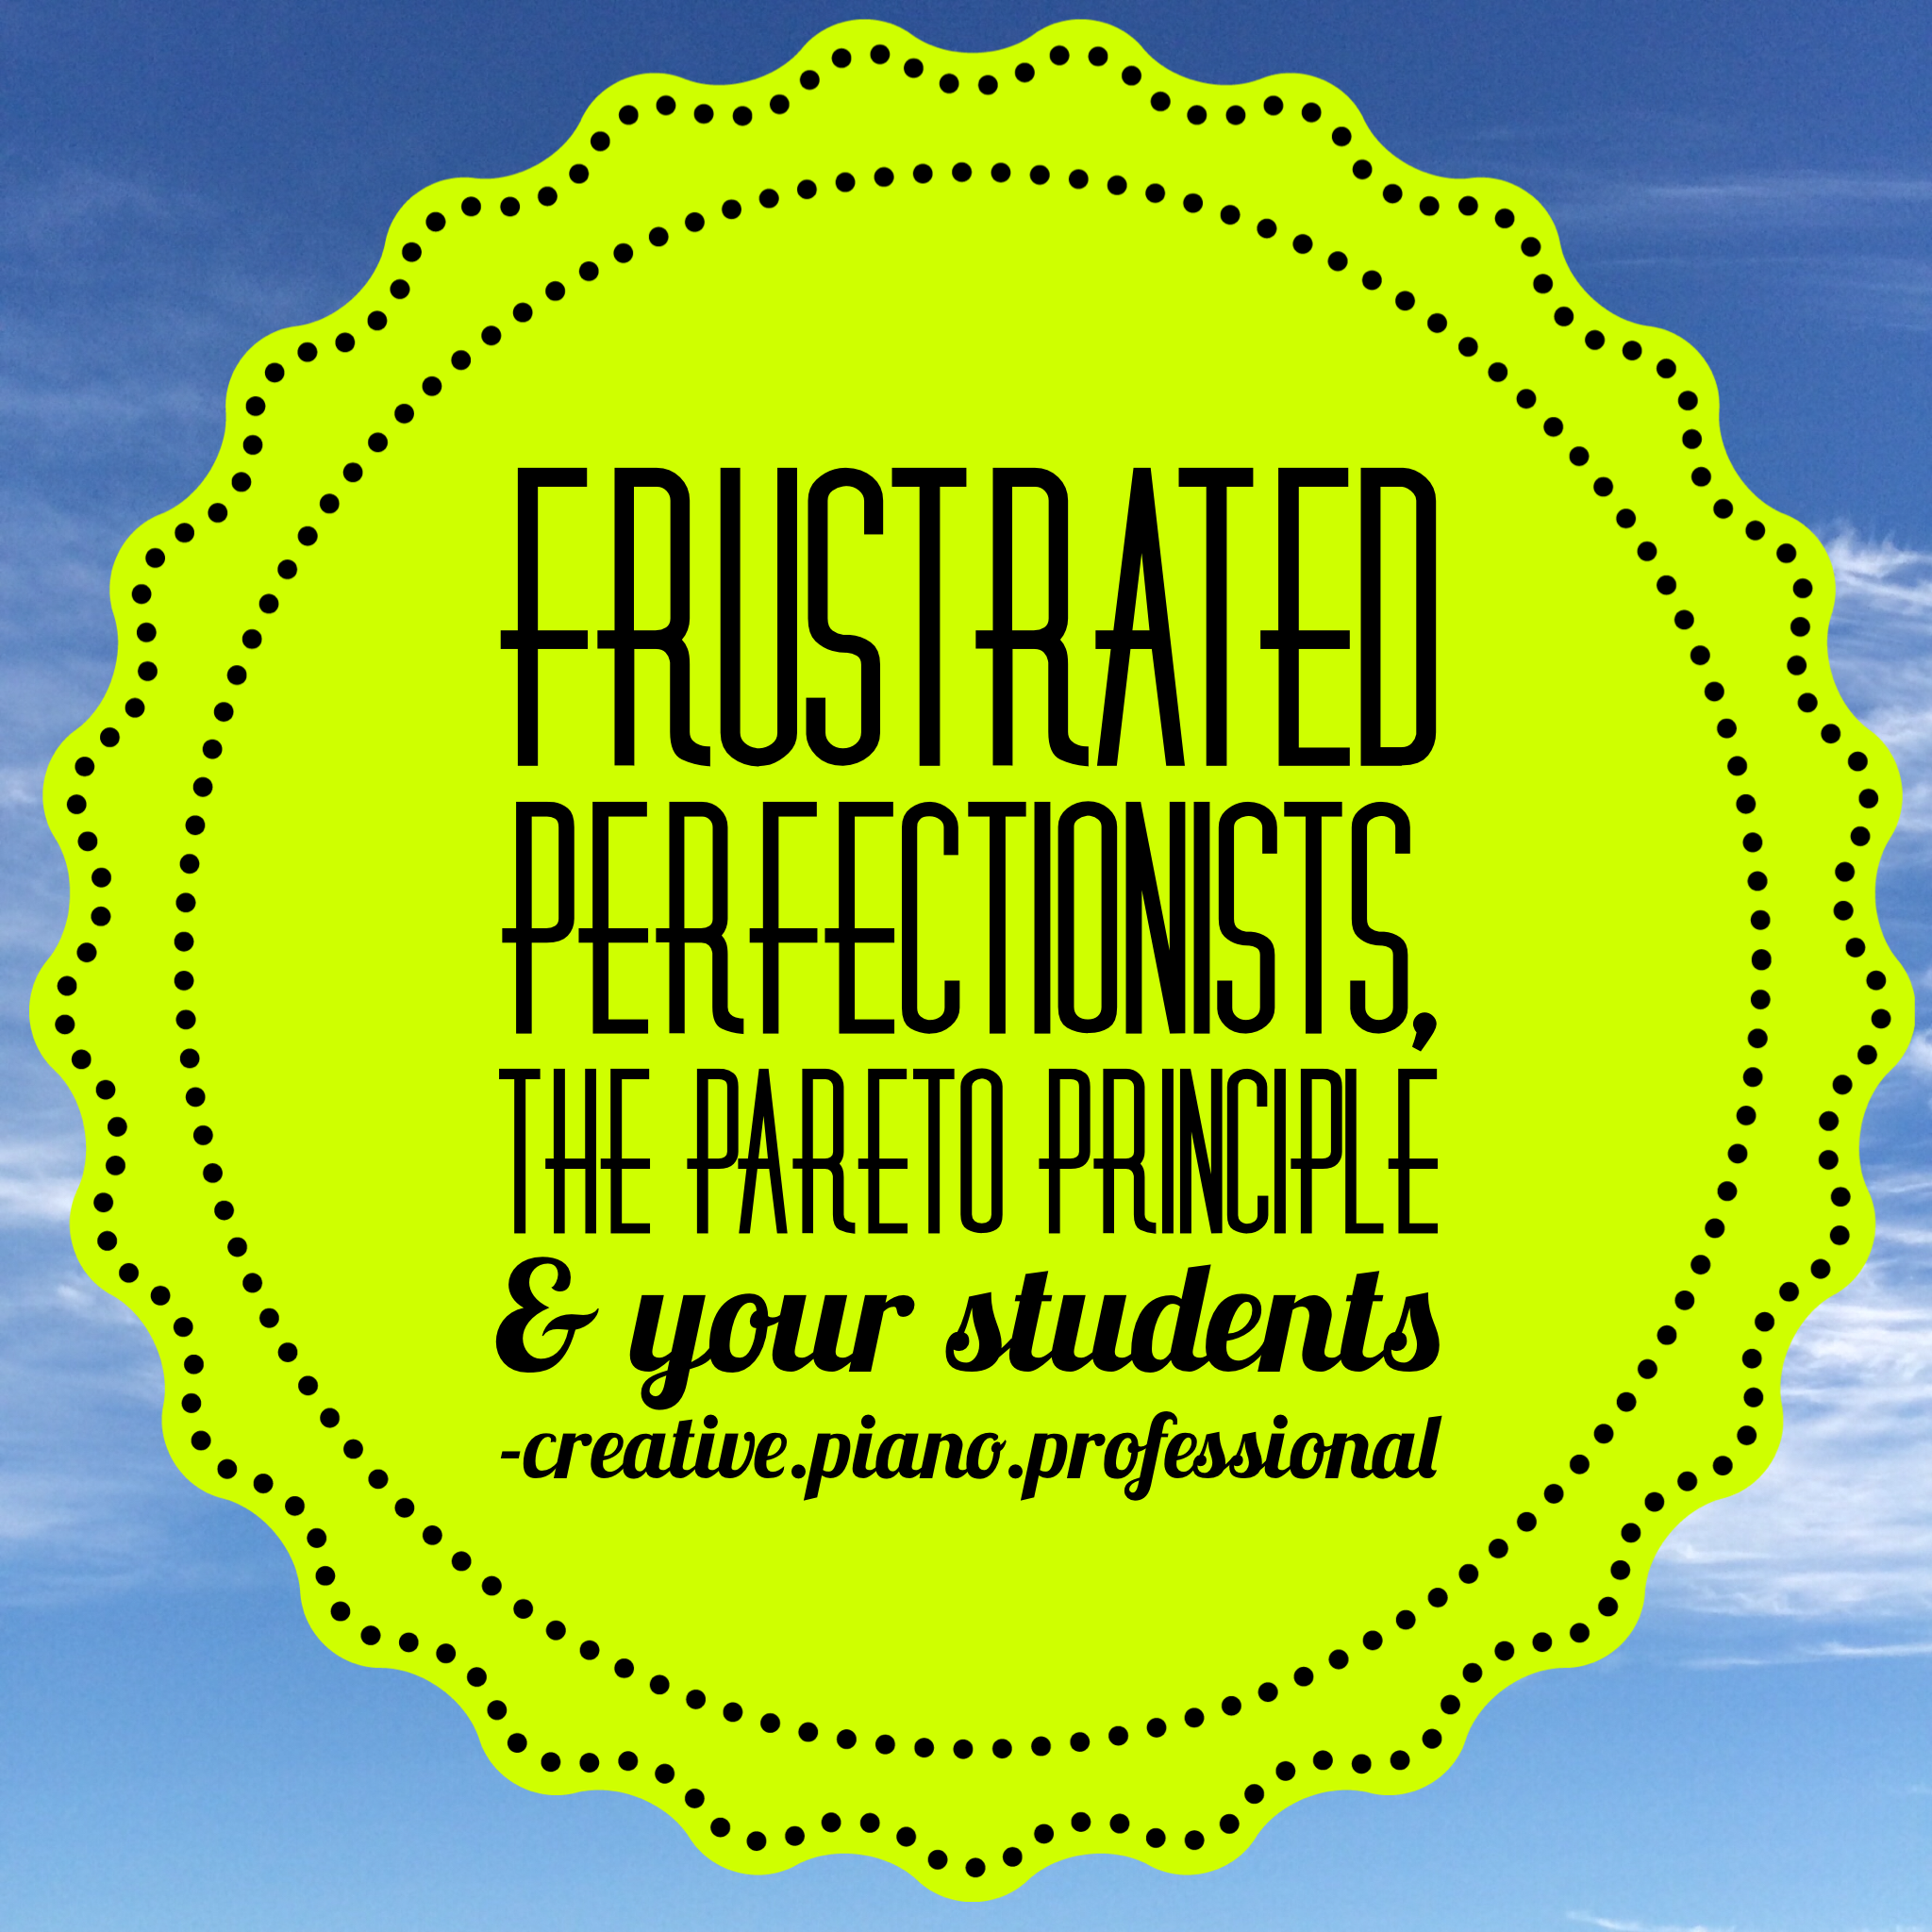 Frustrated Perfectionists The Pareto Principle and Your Students